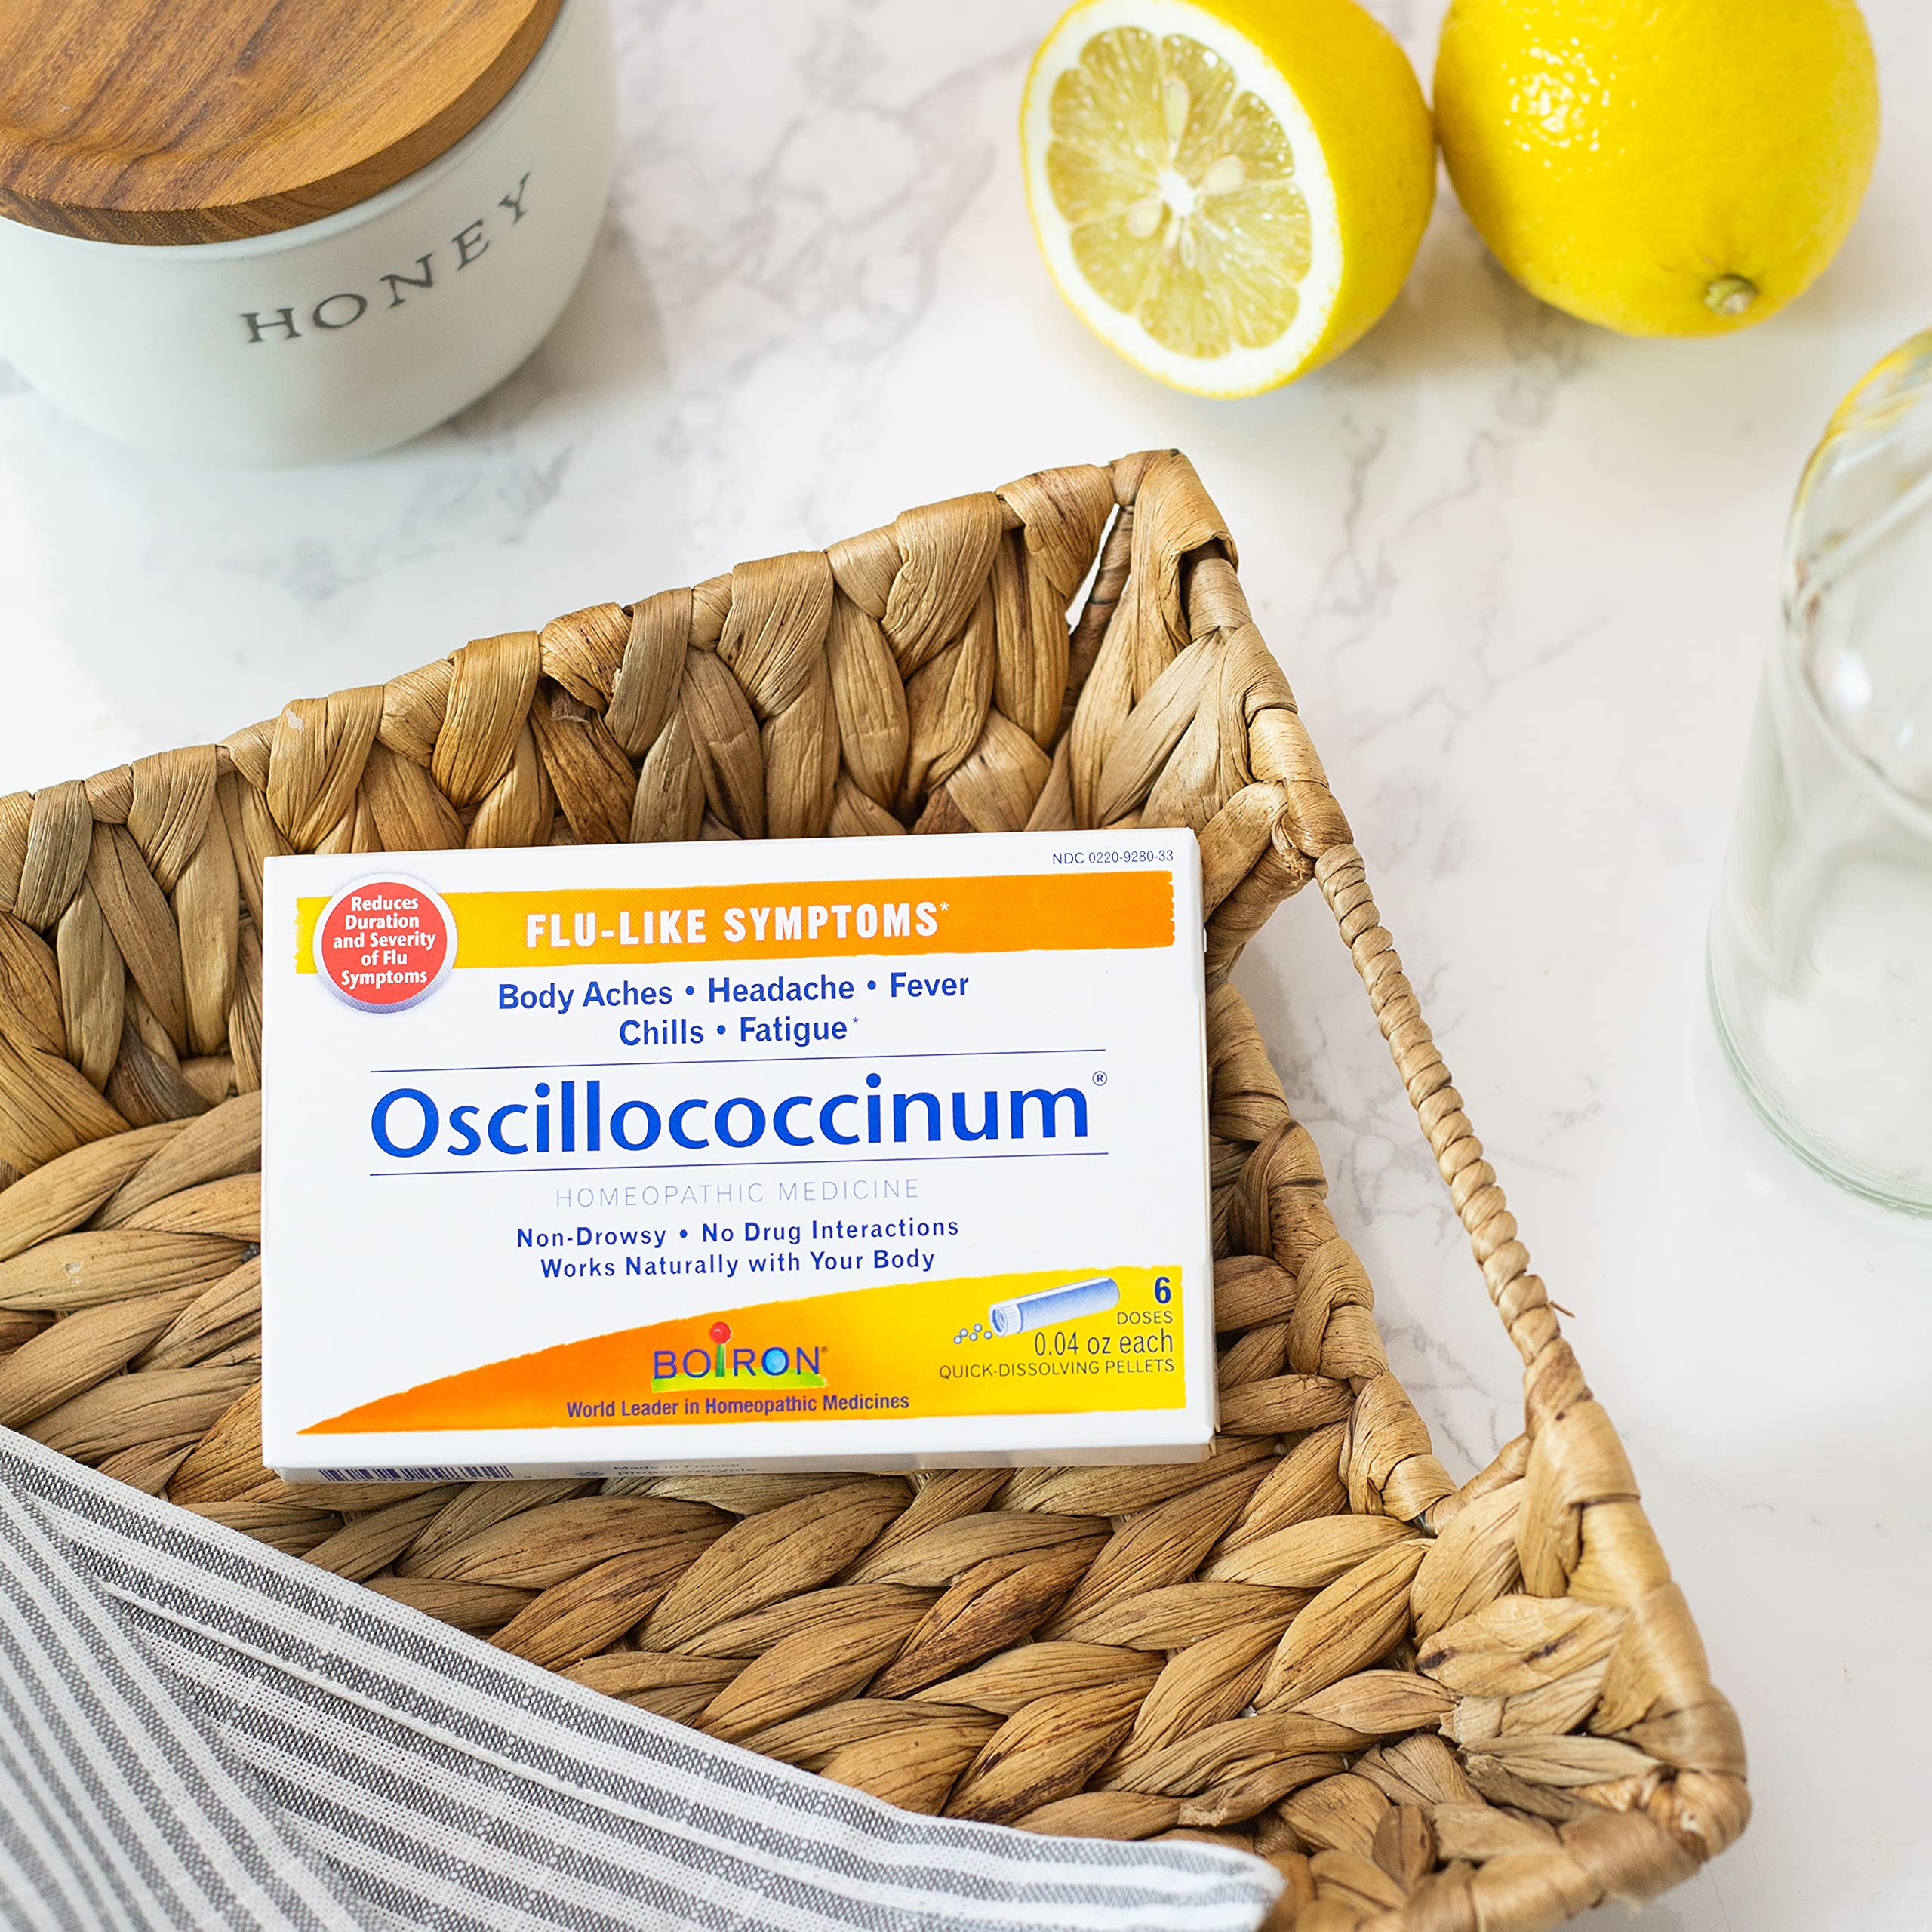 Boiron Oscillococcinum for Relief from Flu-Like Symptoms of Body Aches, Headache, Fever, Chills, and Fatigue - 6 Count (Pack of 2)